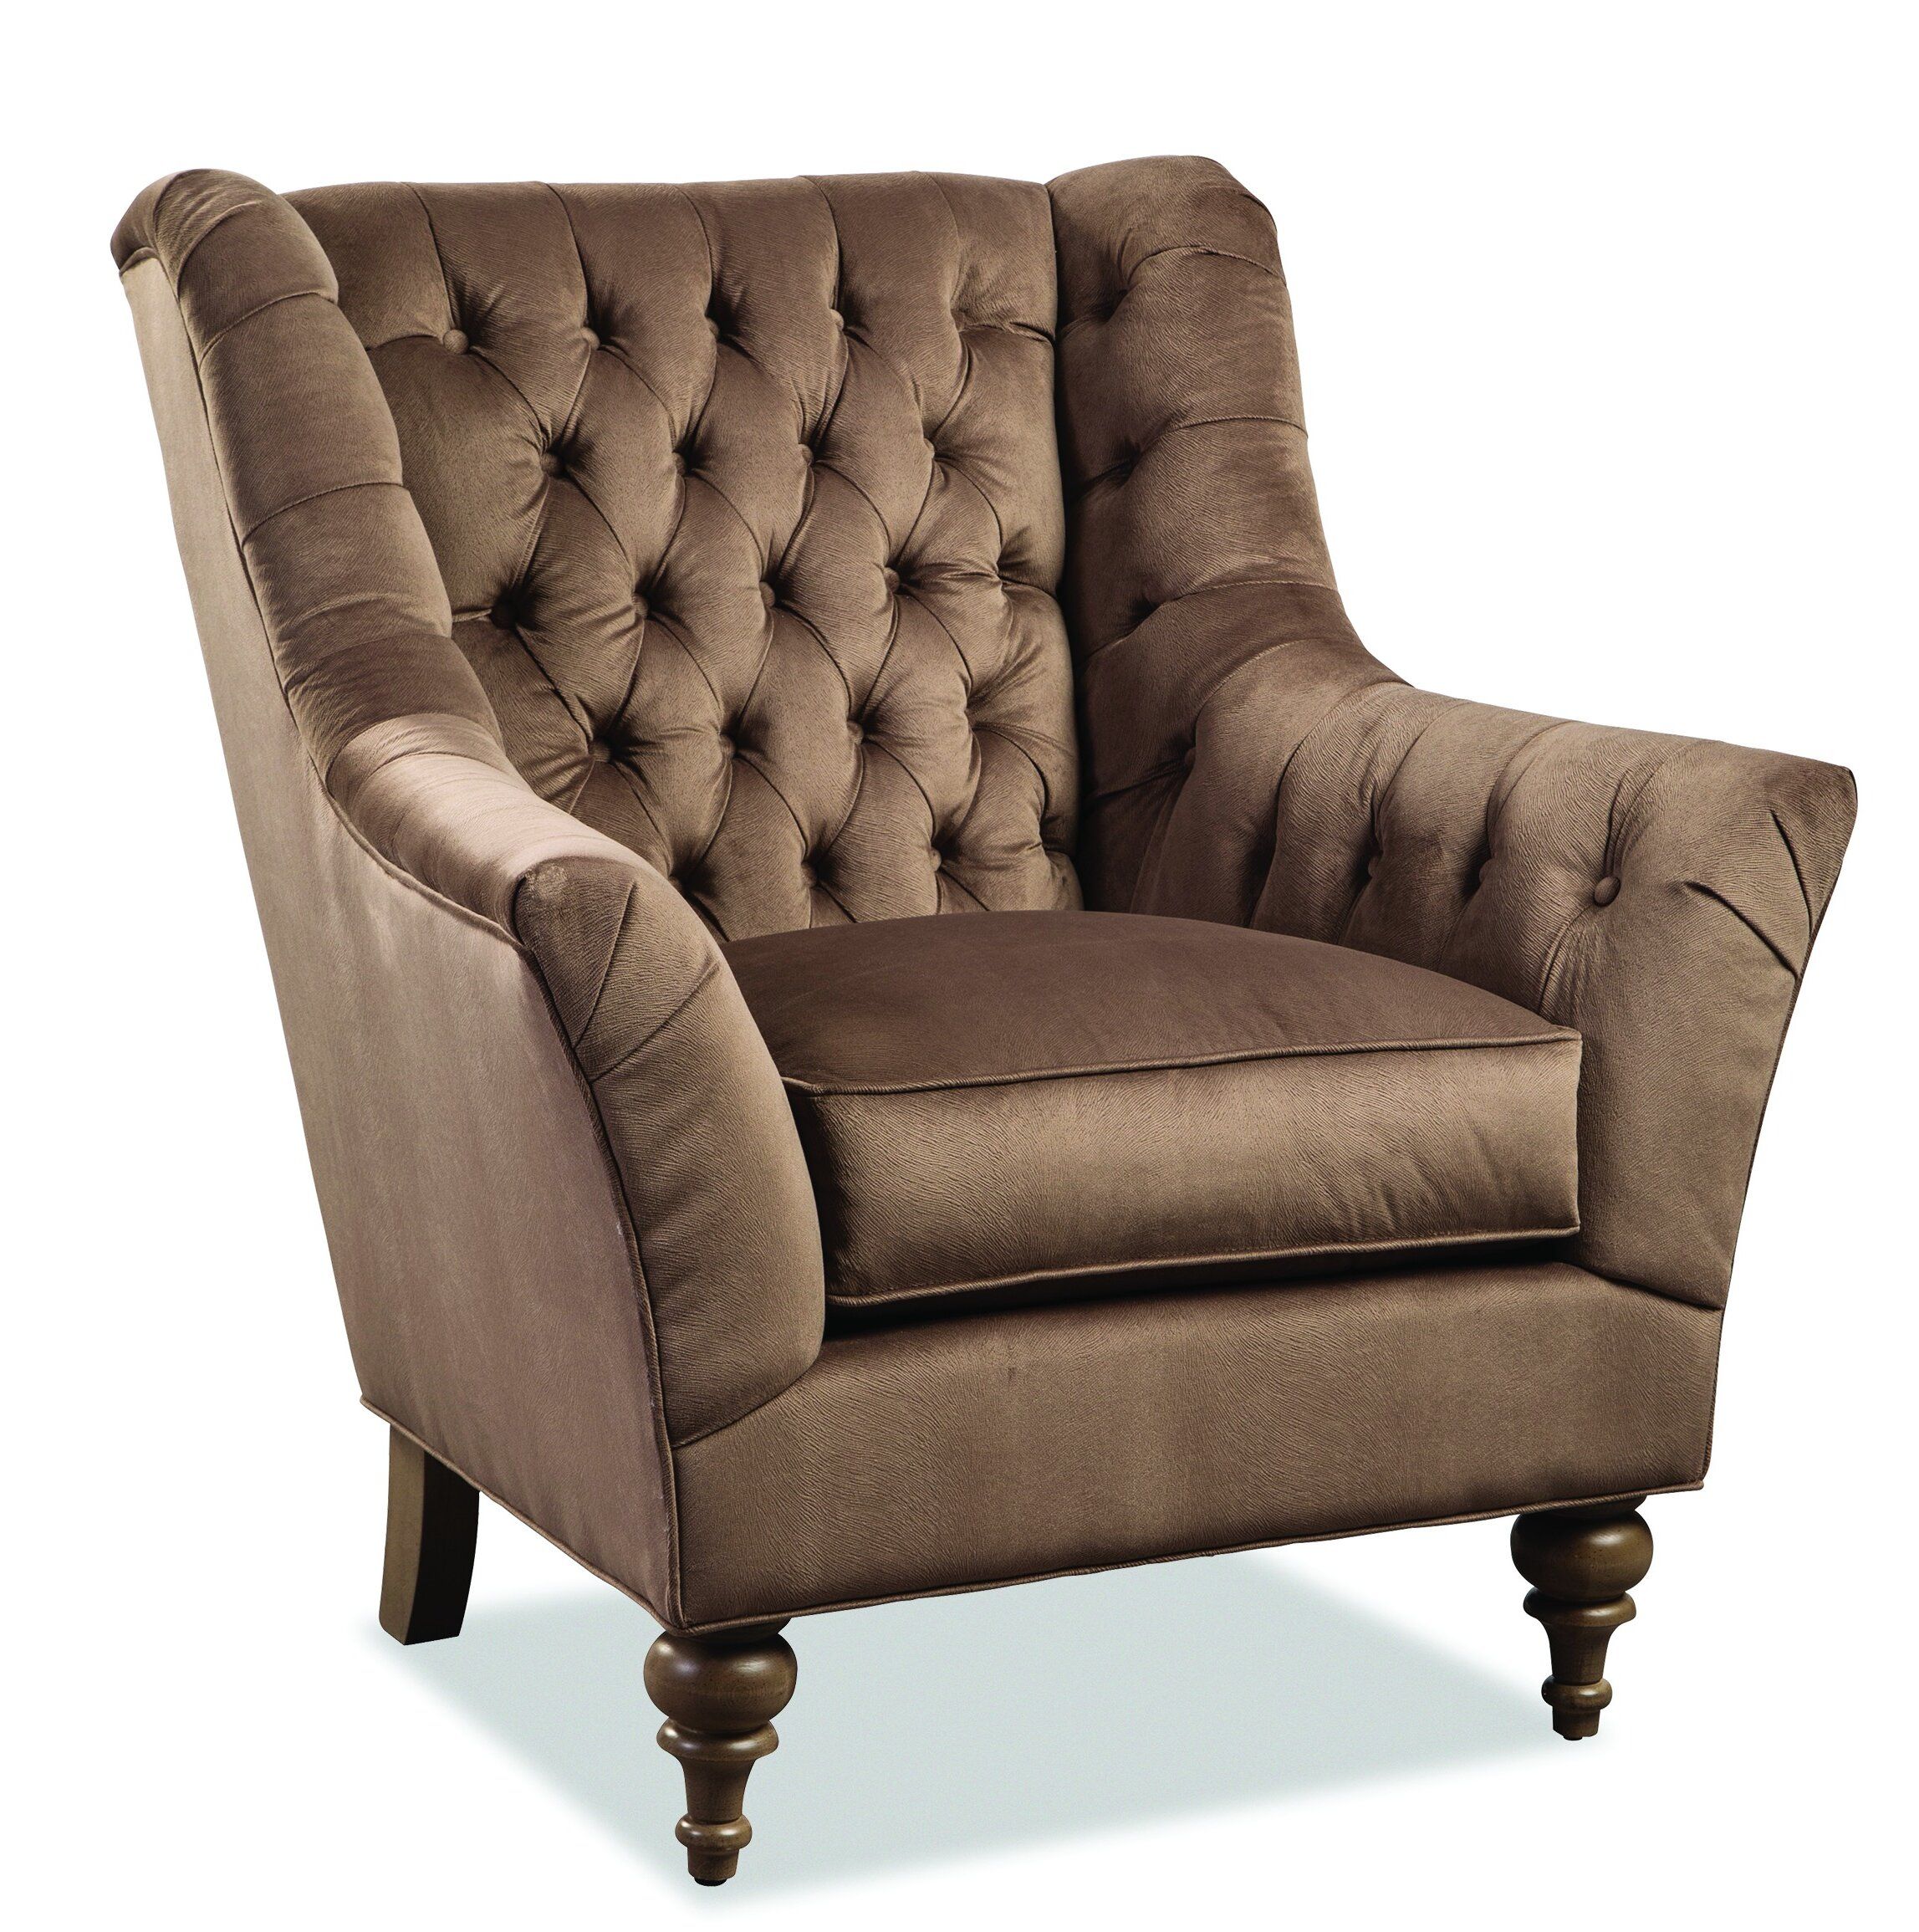 Espresso Wood Wingback Accent Chairs You'Ll Love In 2021 Within Waterton Wingback Chairs (View 6 of 15)